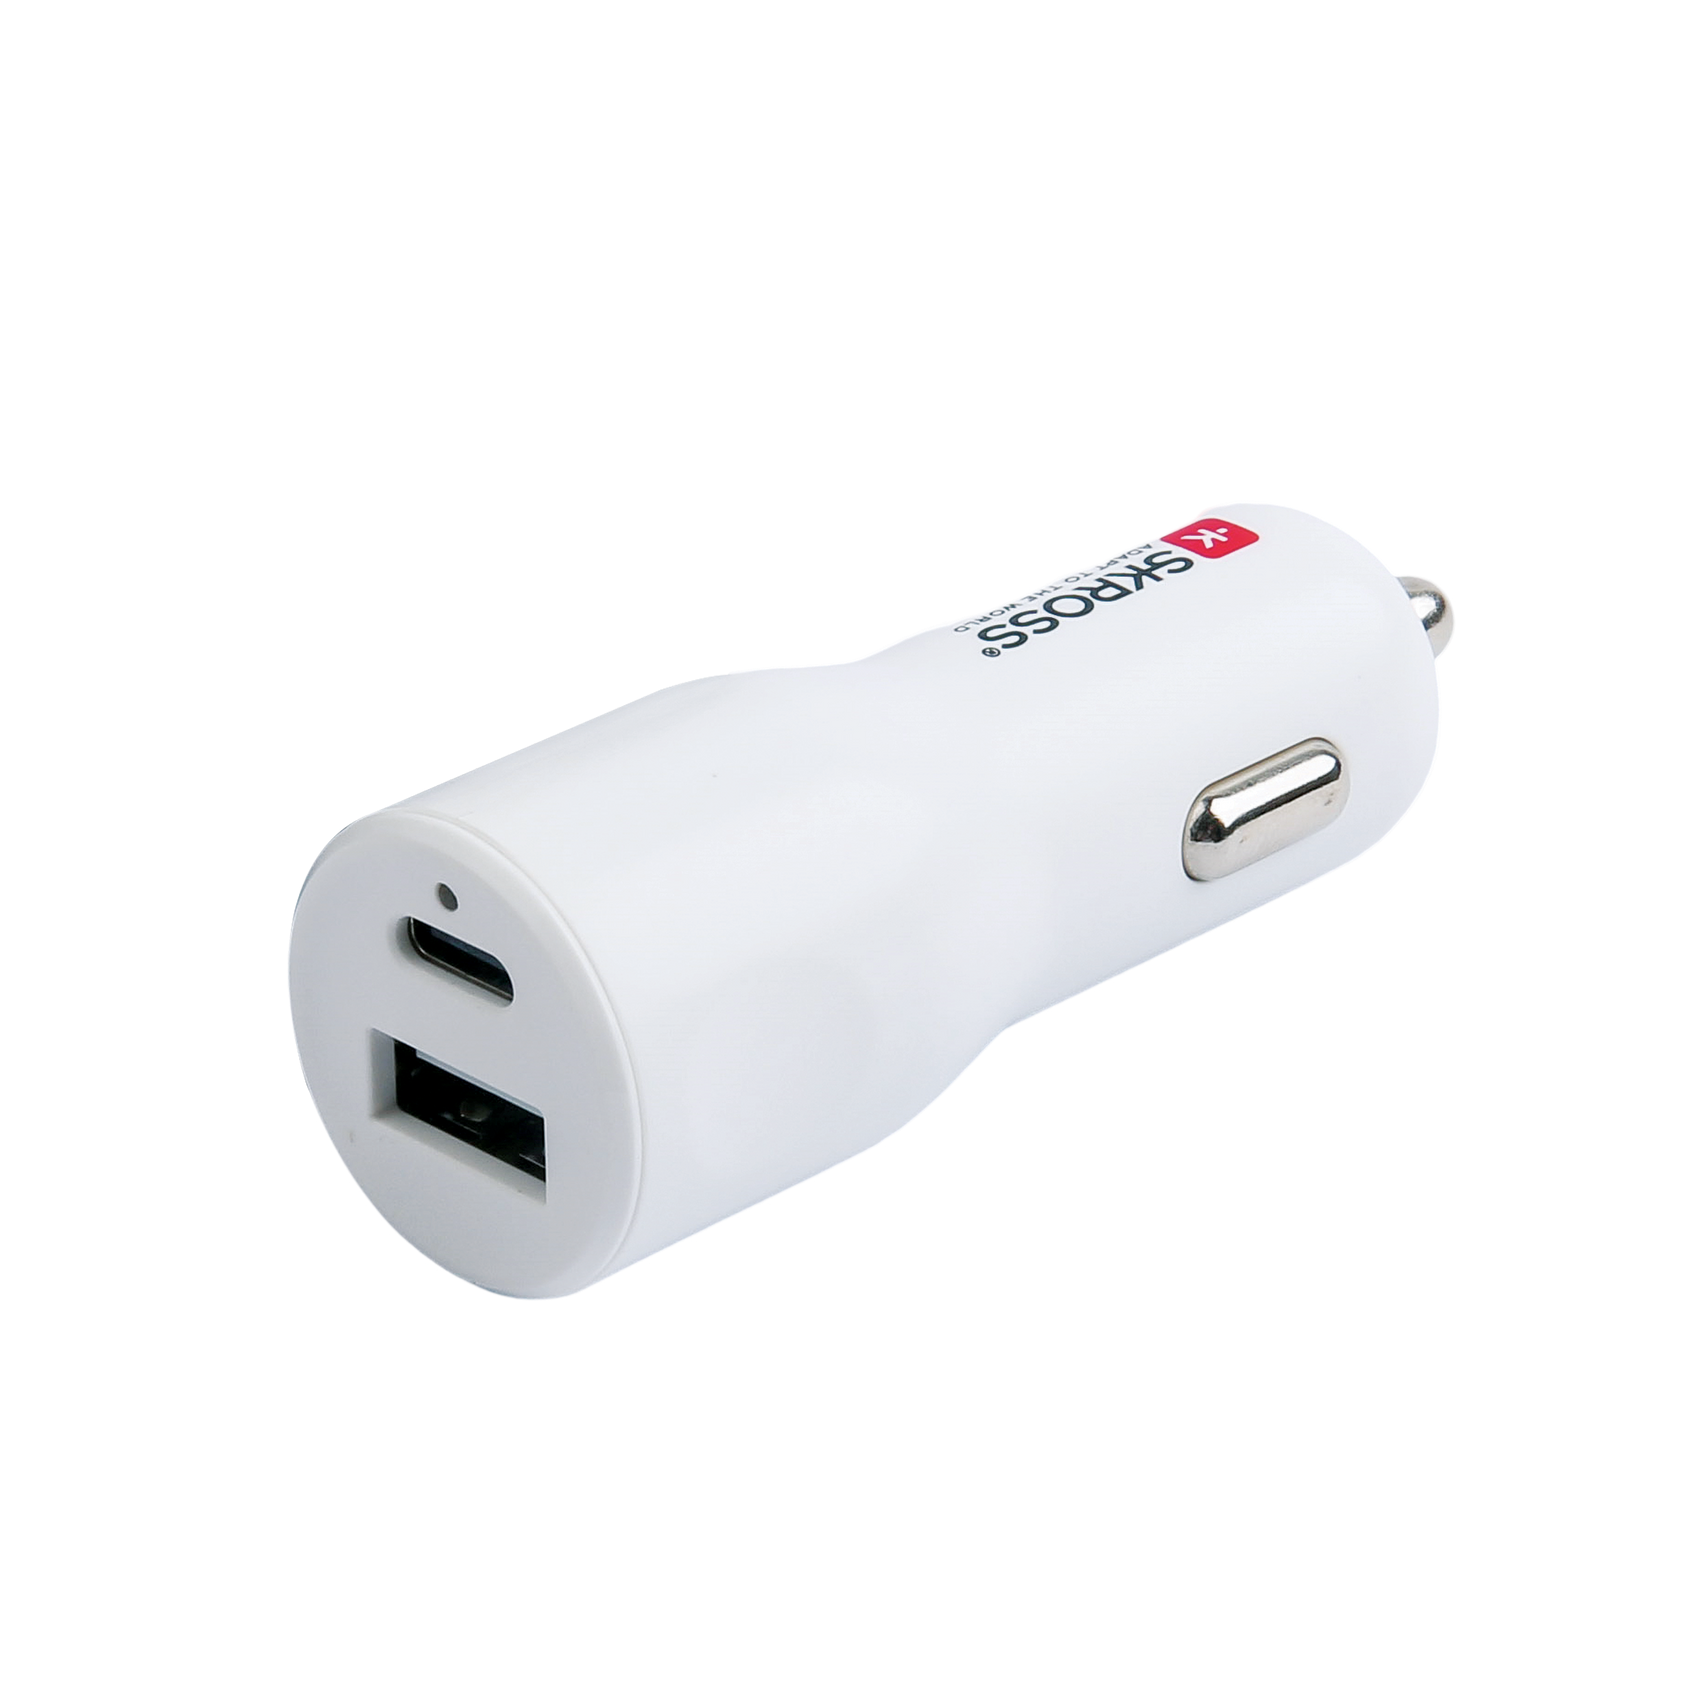 Skross Fast Charging 20w USB Car Charger rear